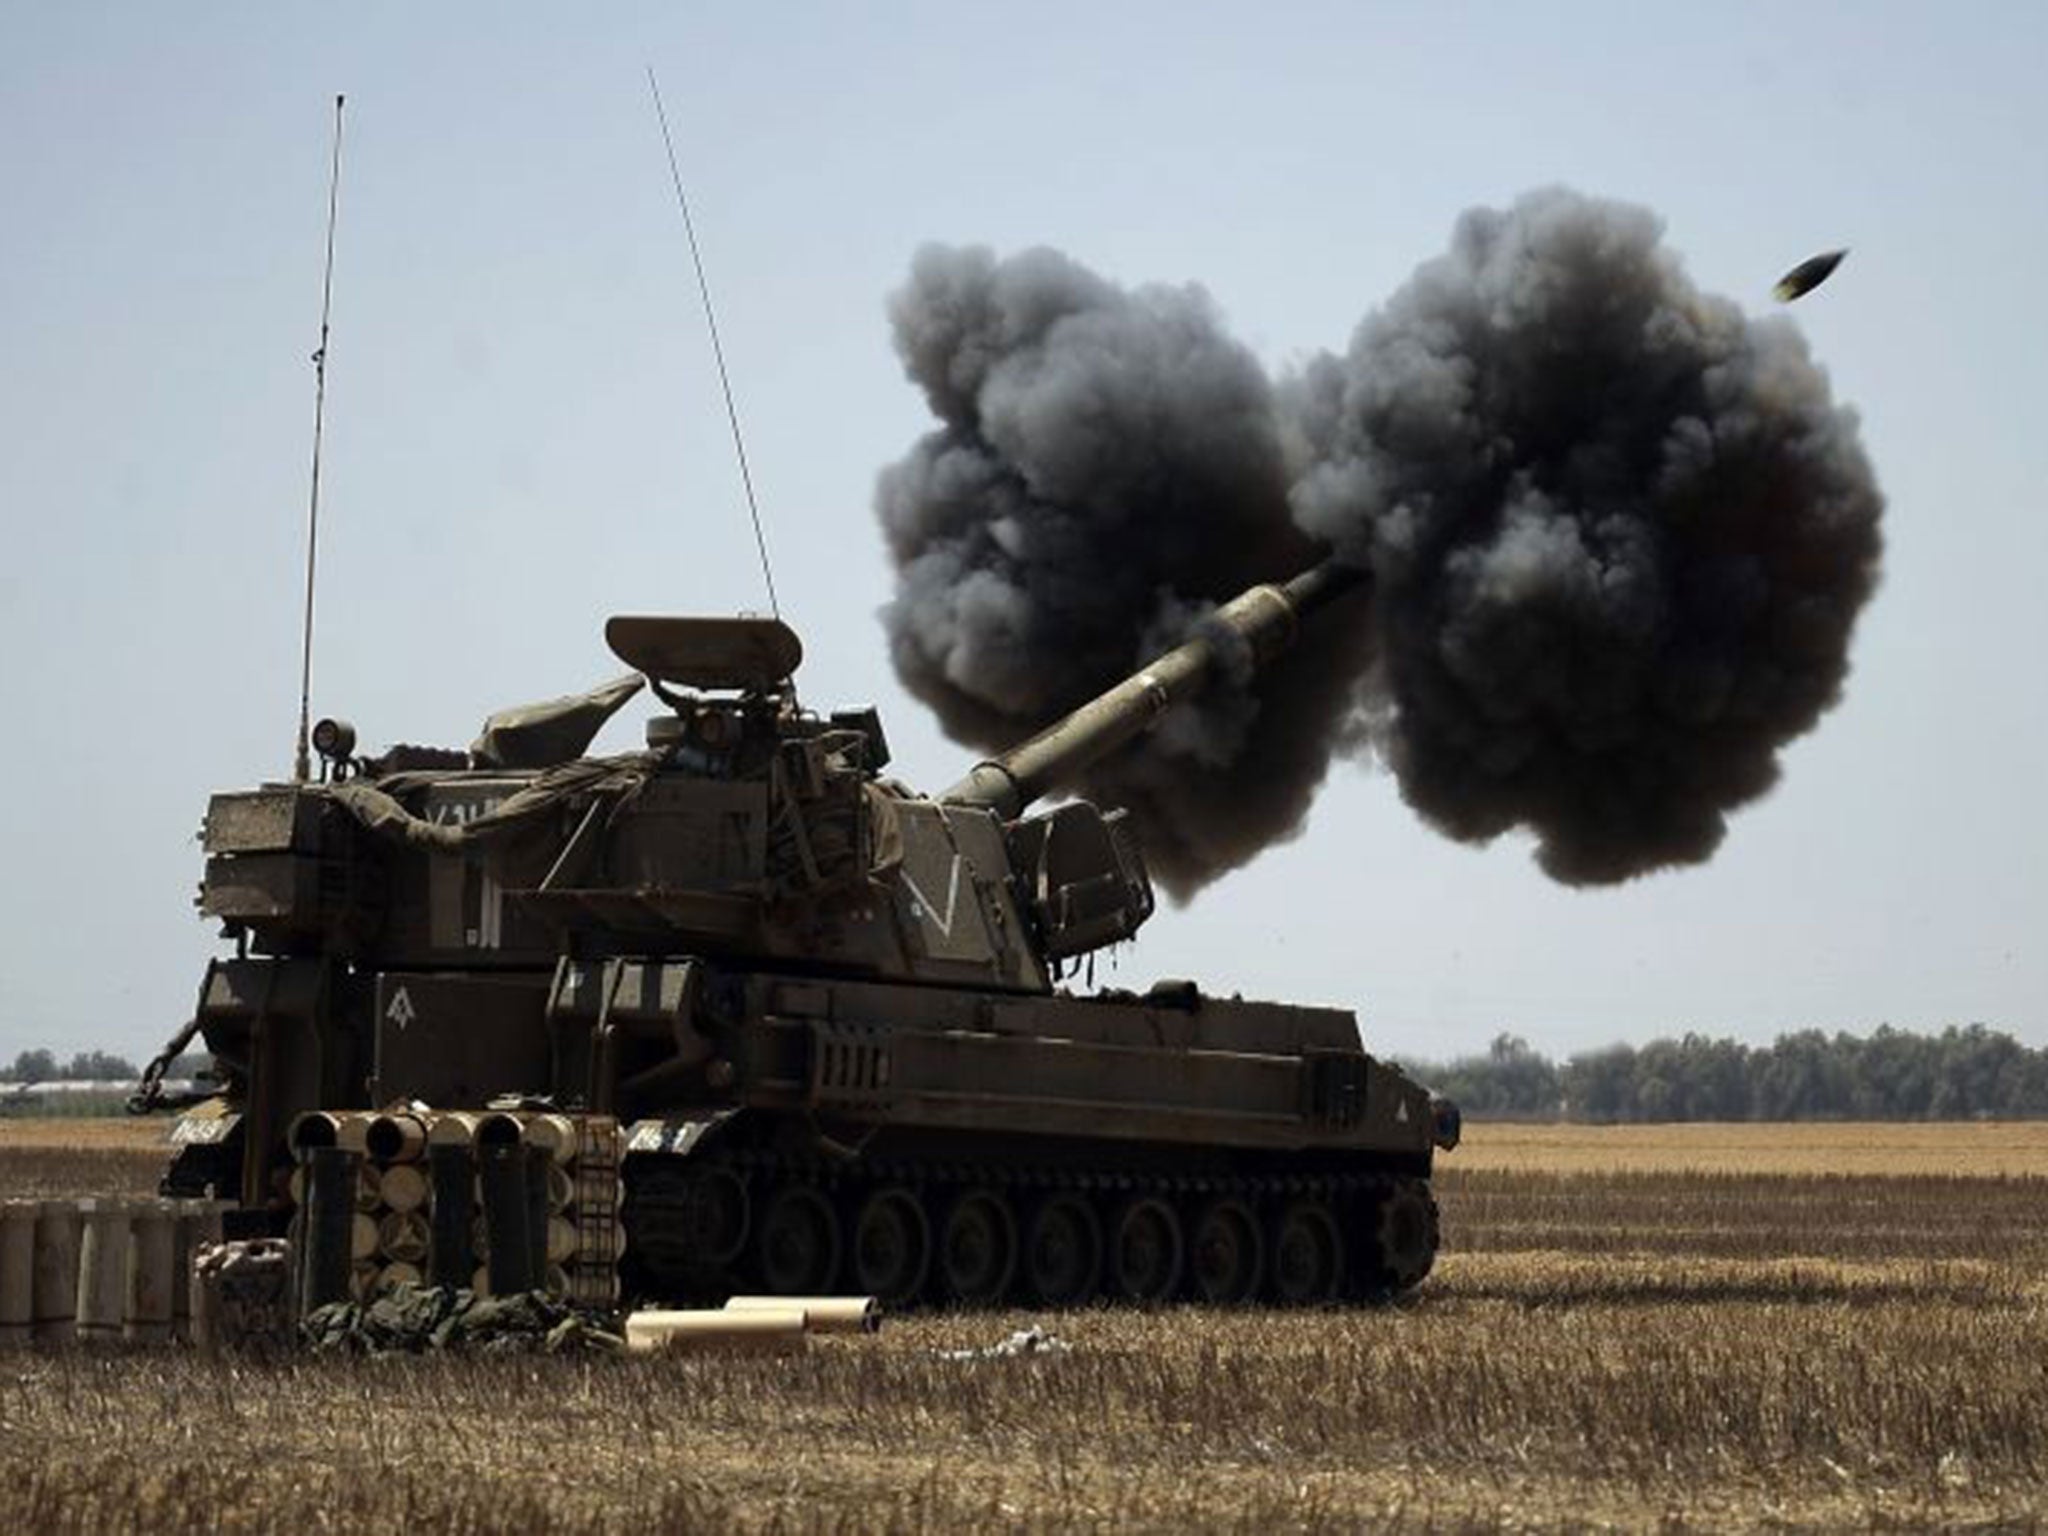 An Israeli canon fires a shell towards targets in the Gaza Strip on 2 August